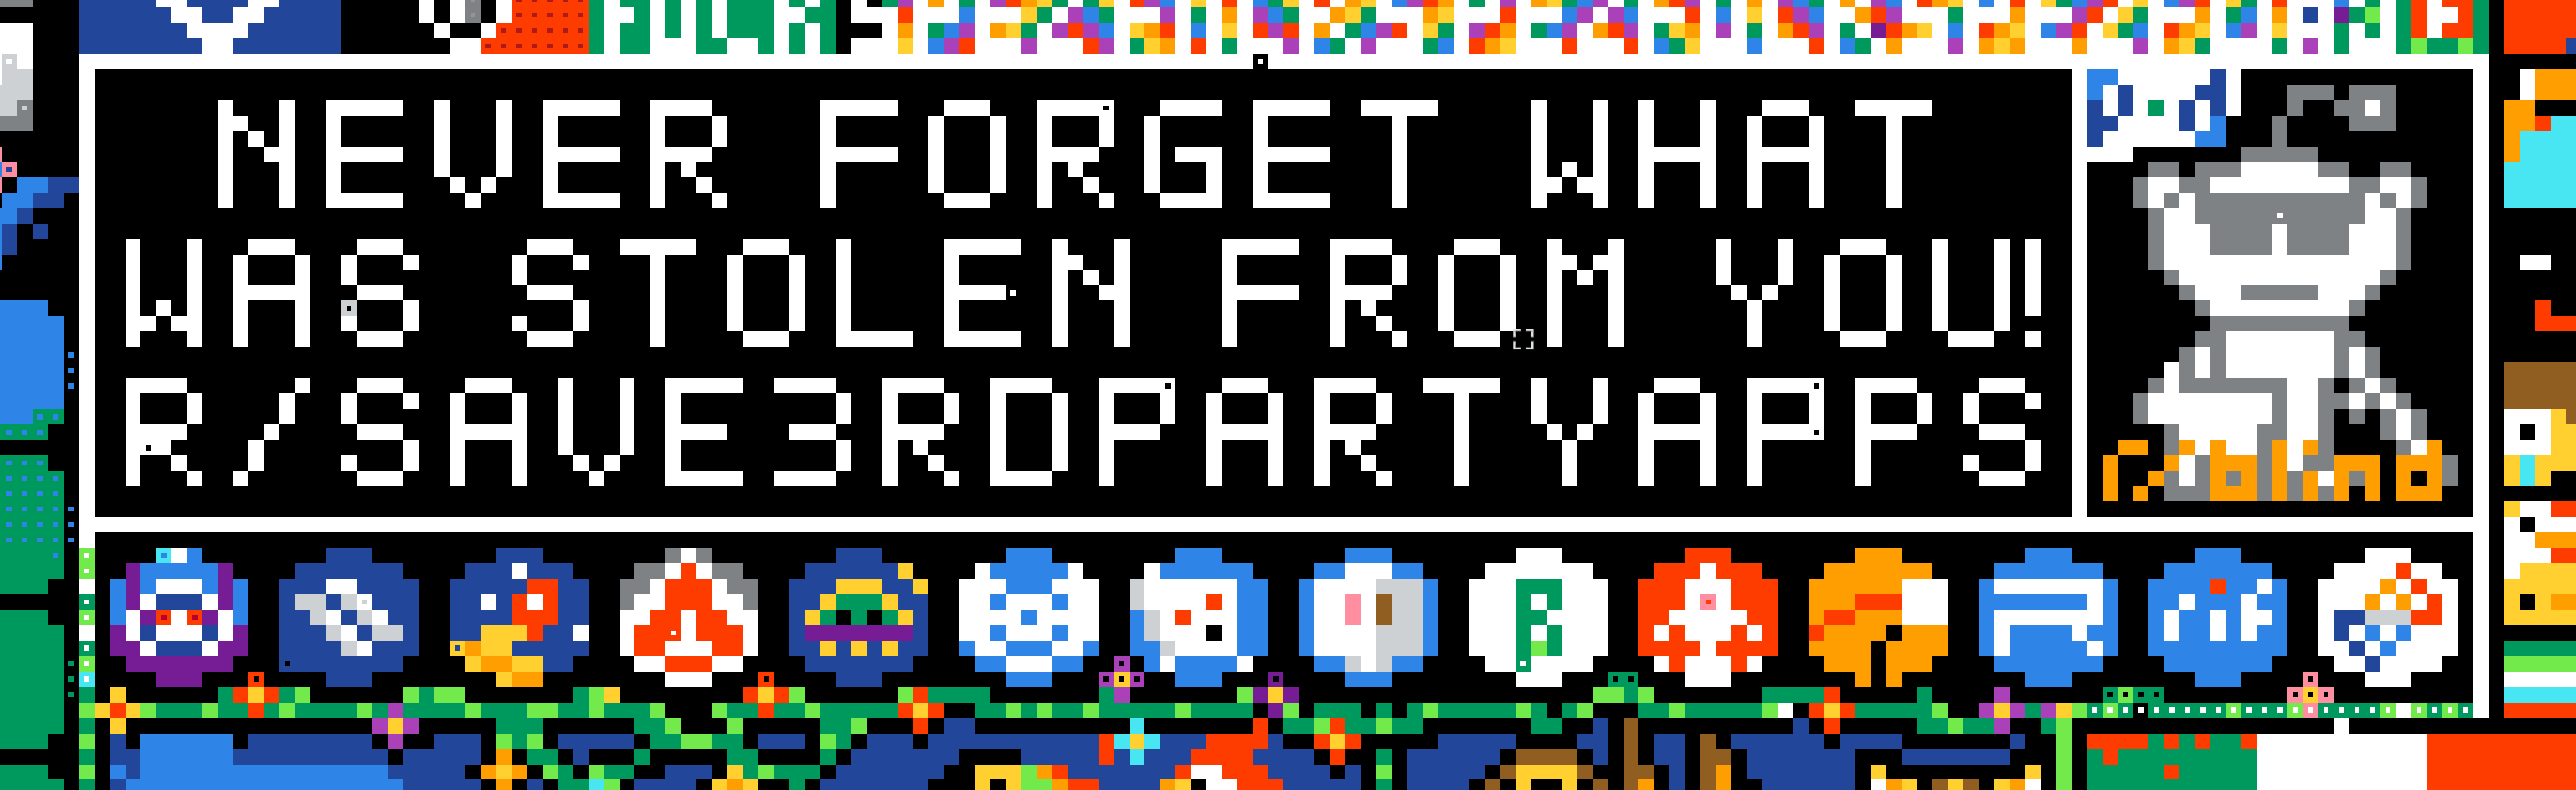 white on black, "never forget what was stolen from you! r/save3rdpartyapps" text, r/blind Snoo and text, multiple 3rd party Reddit apps logos